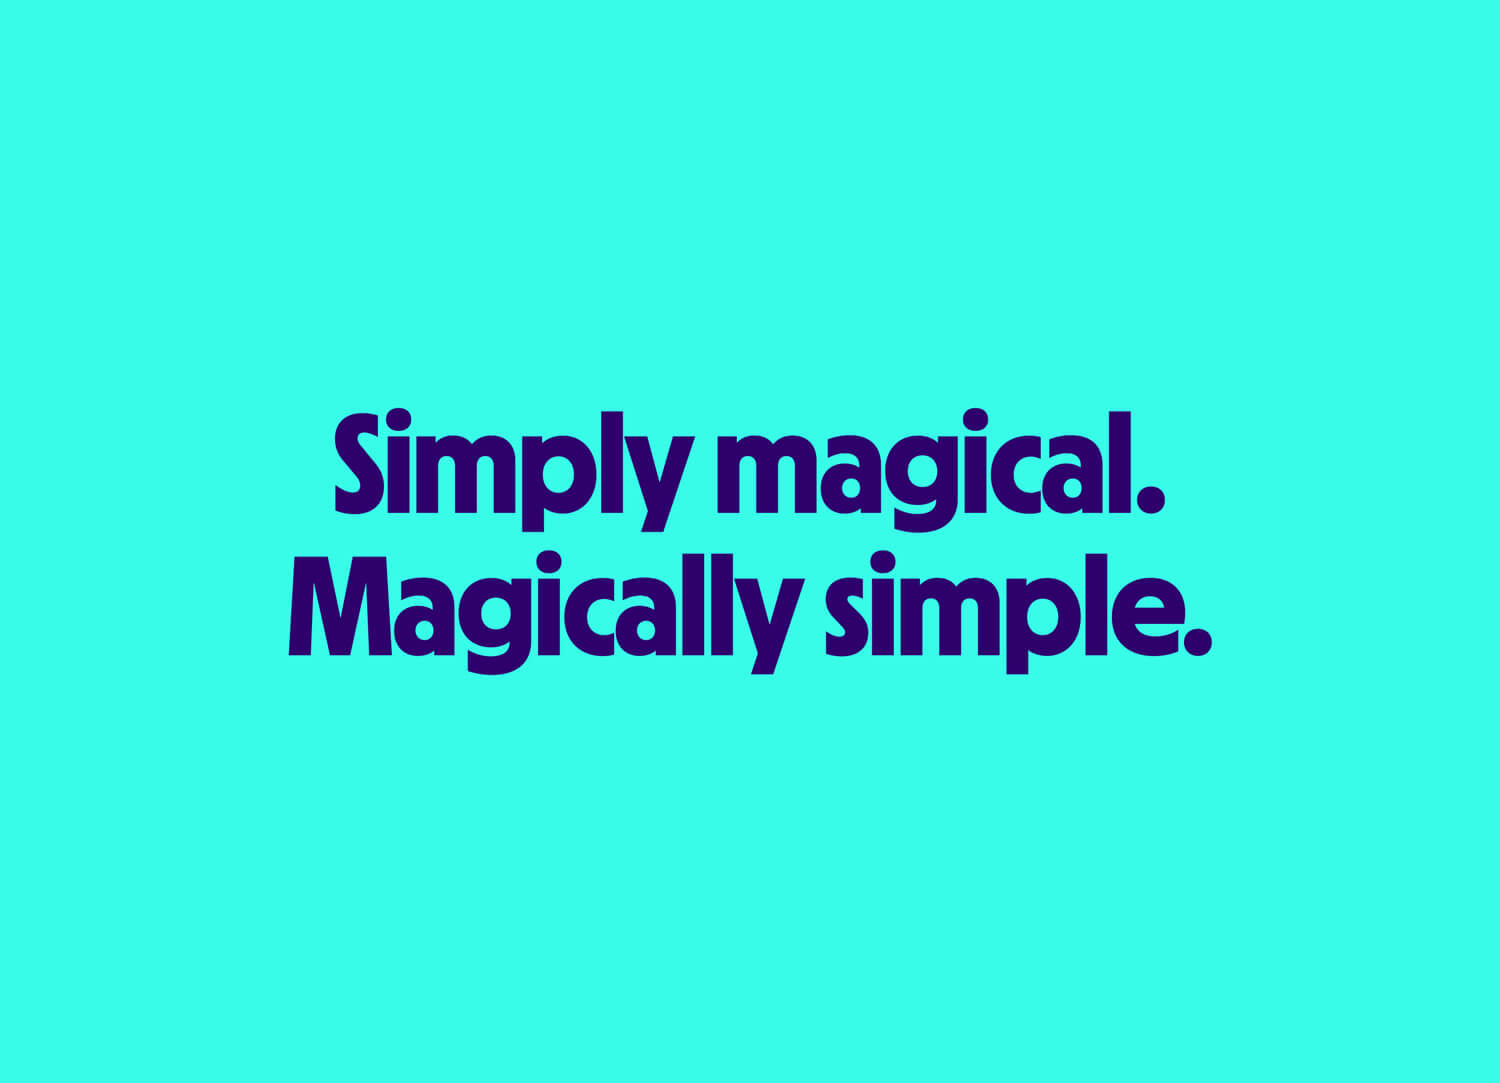 Magically Simple by Imaginary Friends